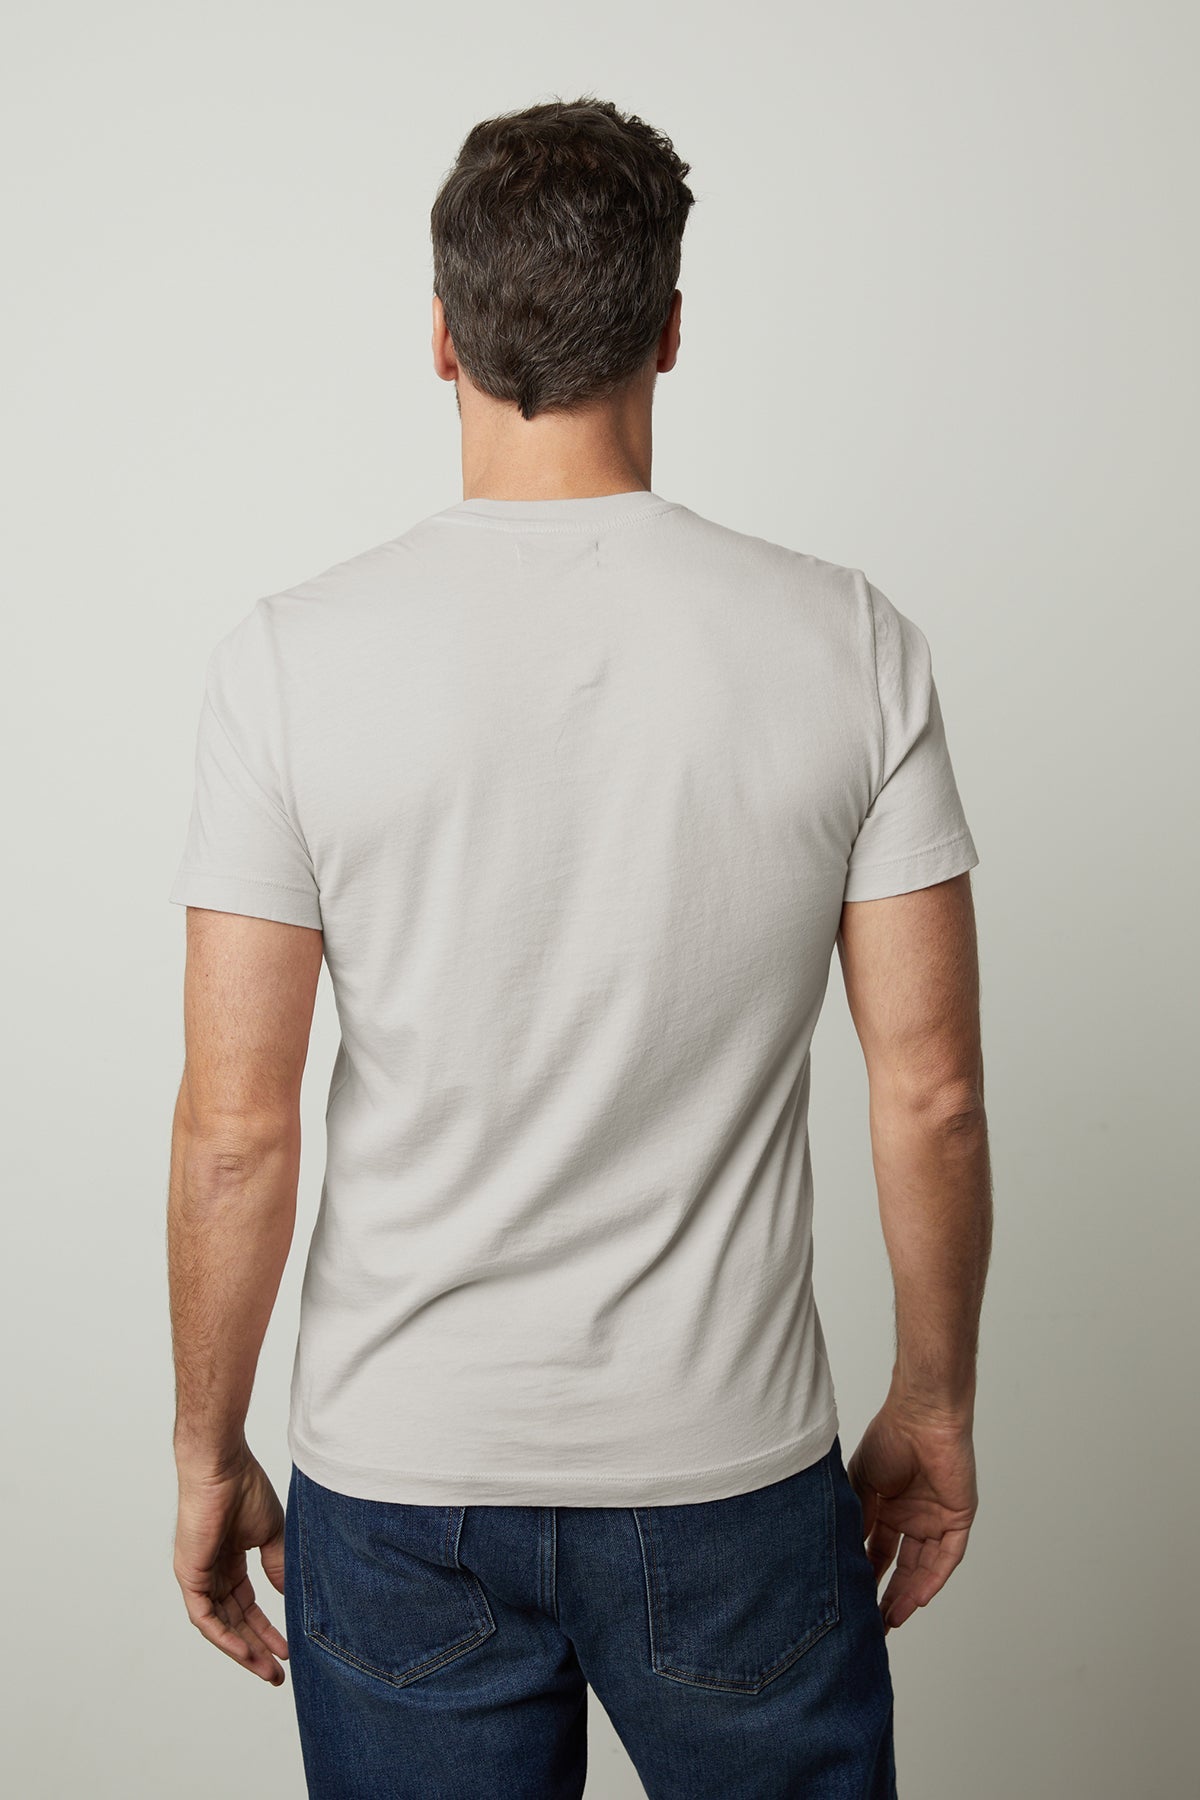   howard whisper classic crew neck tee in cement crew neck tee in cement back view 